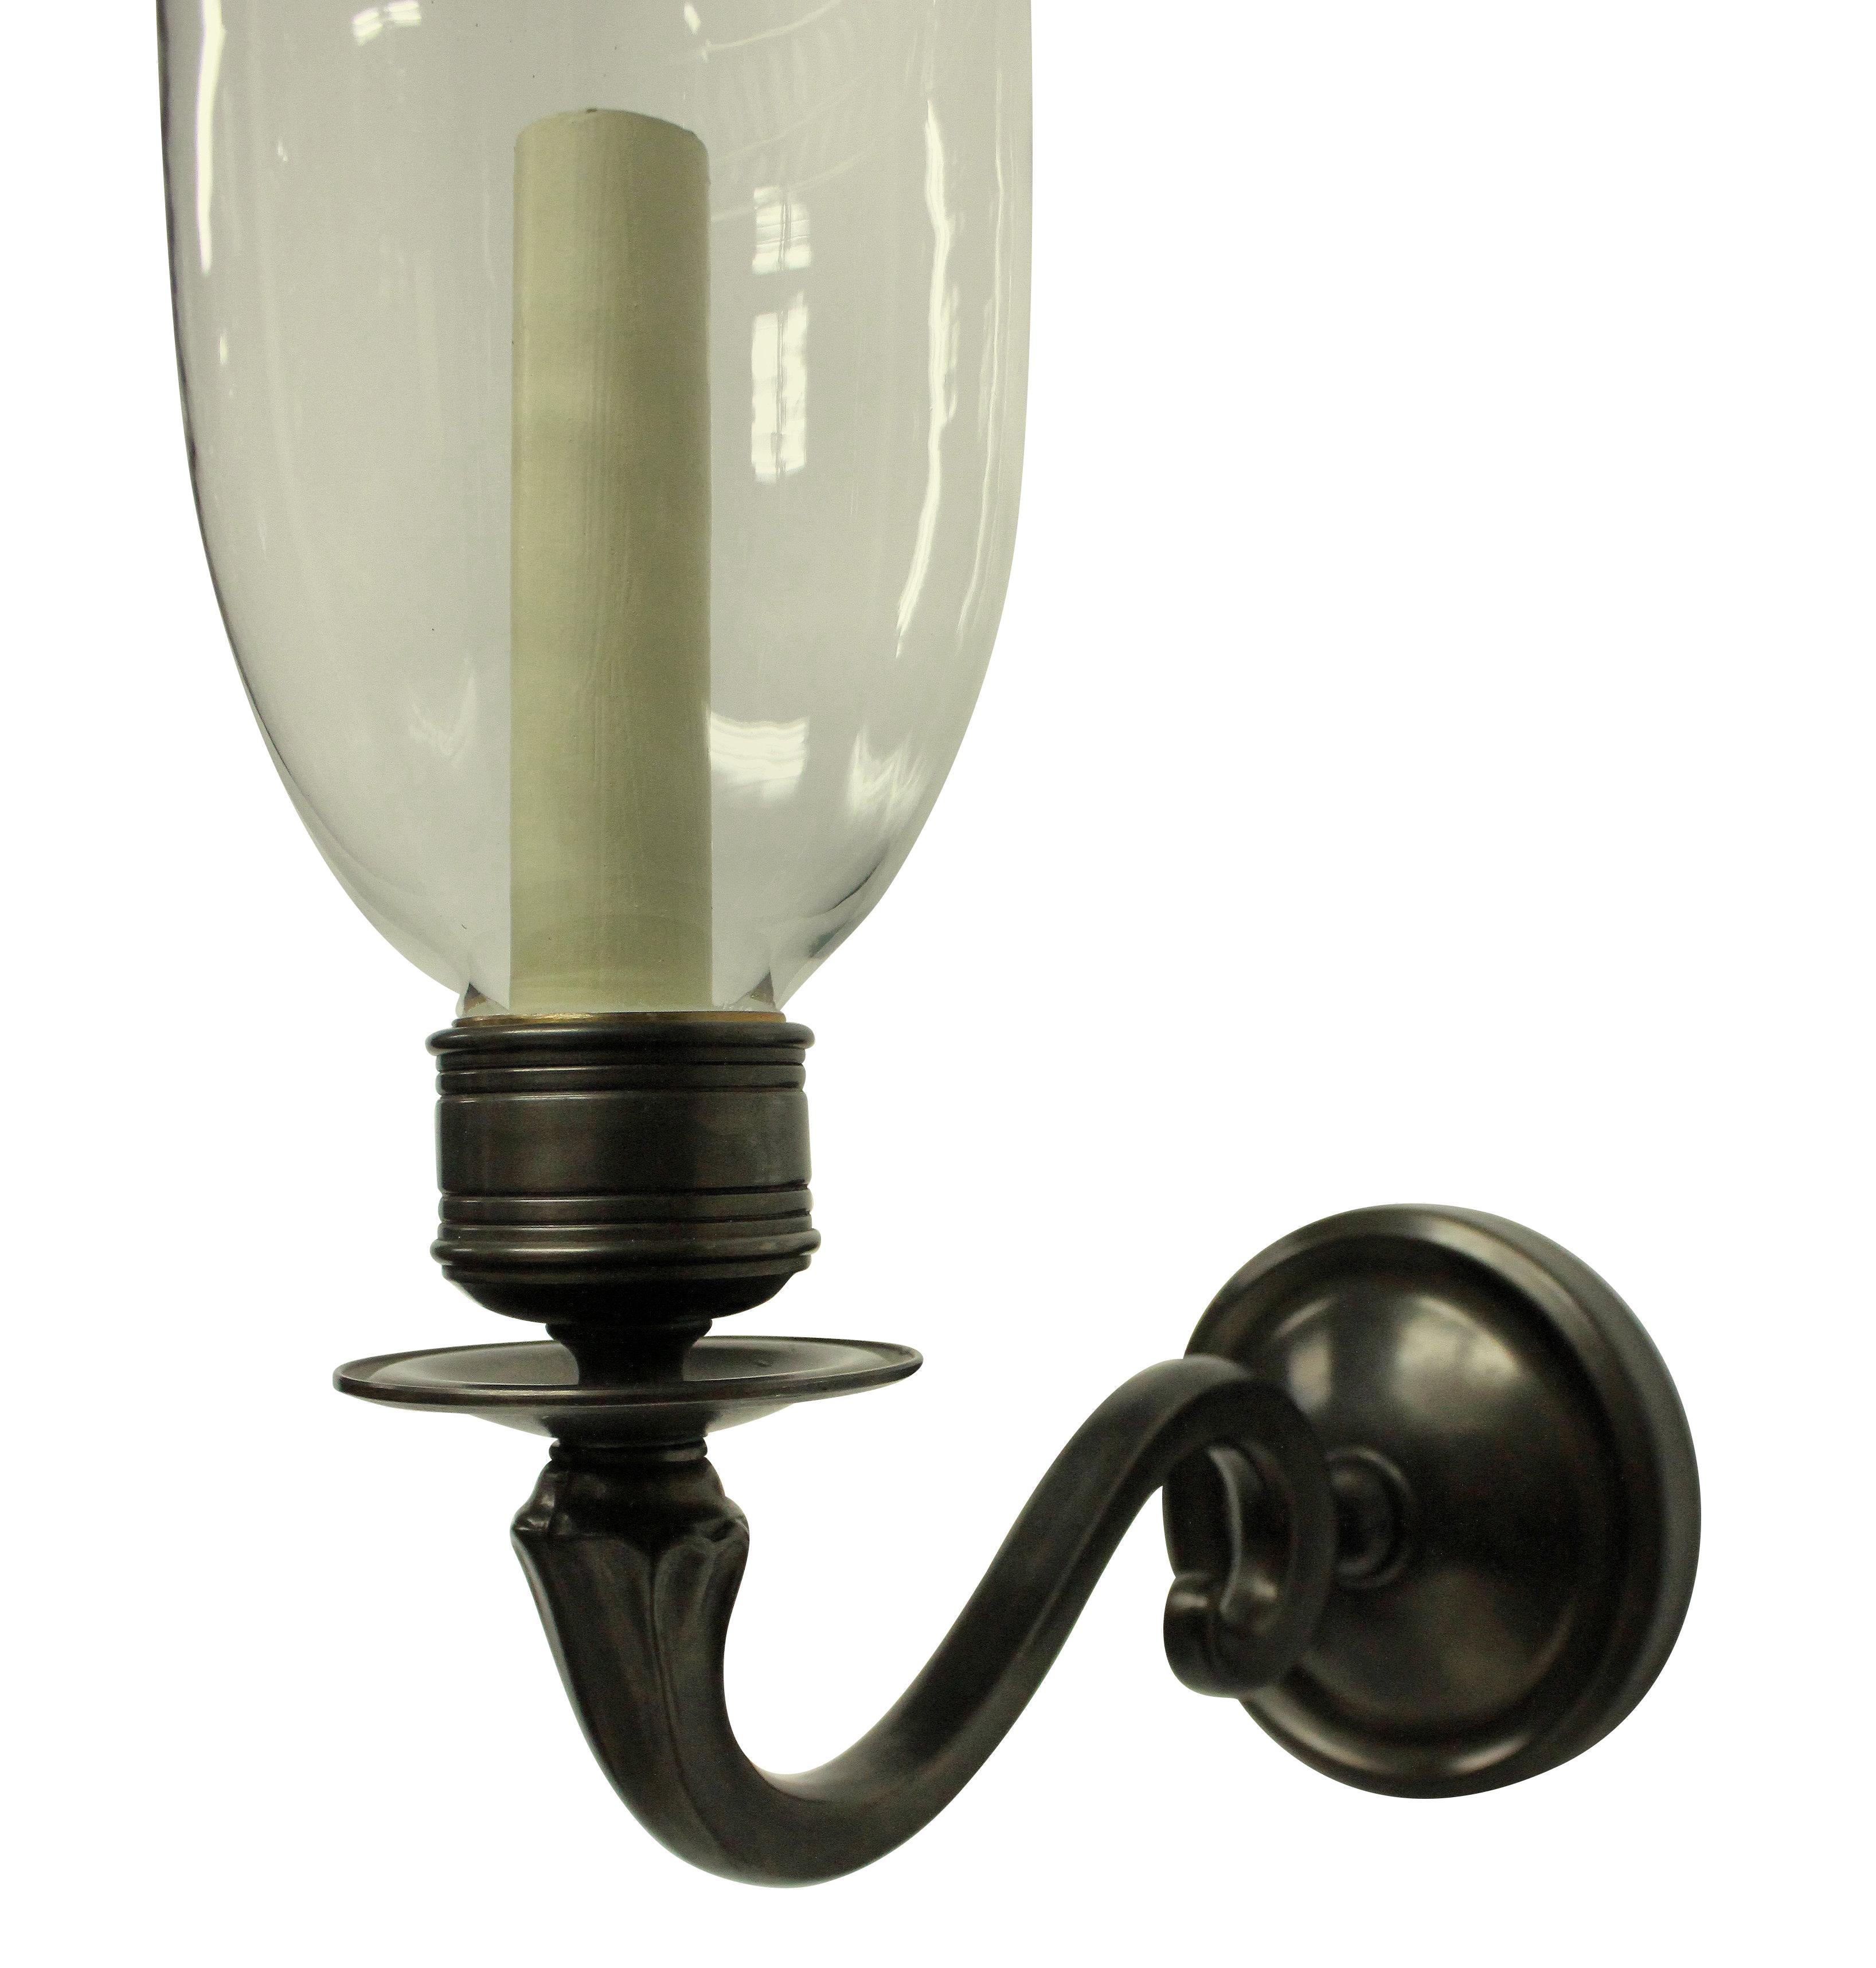 A pair of English Regency style bronzed wall lights with glass storm shades.